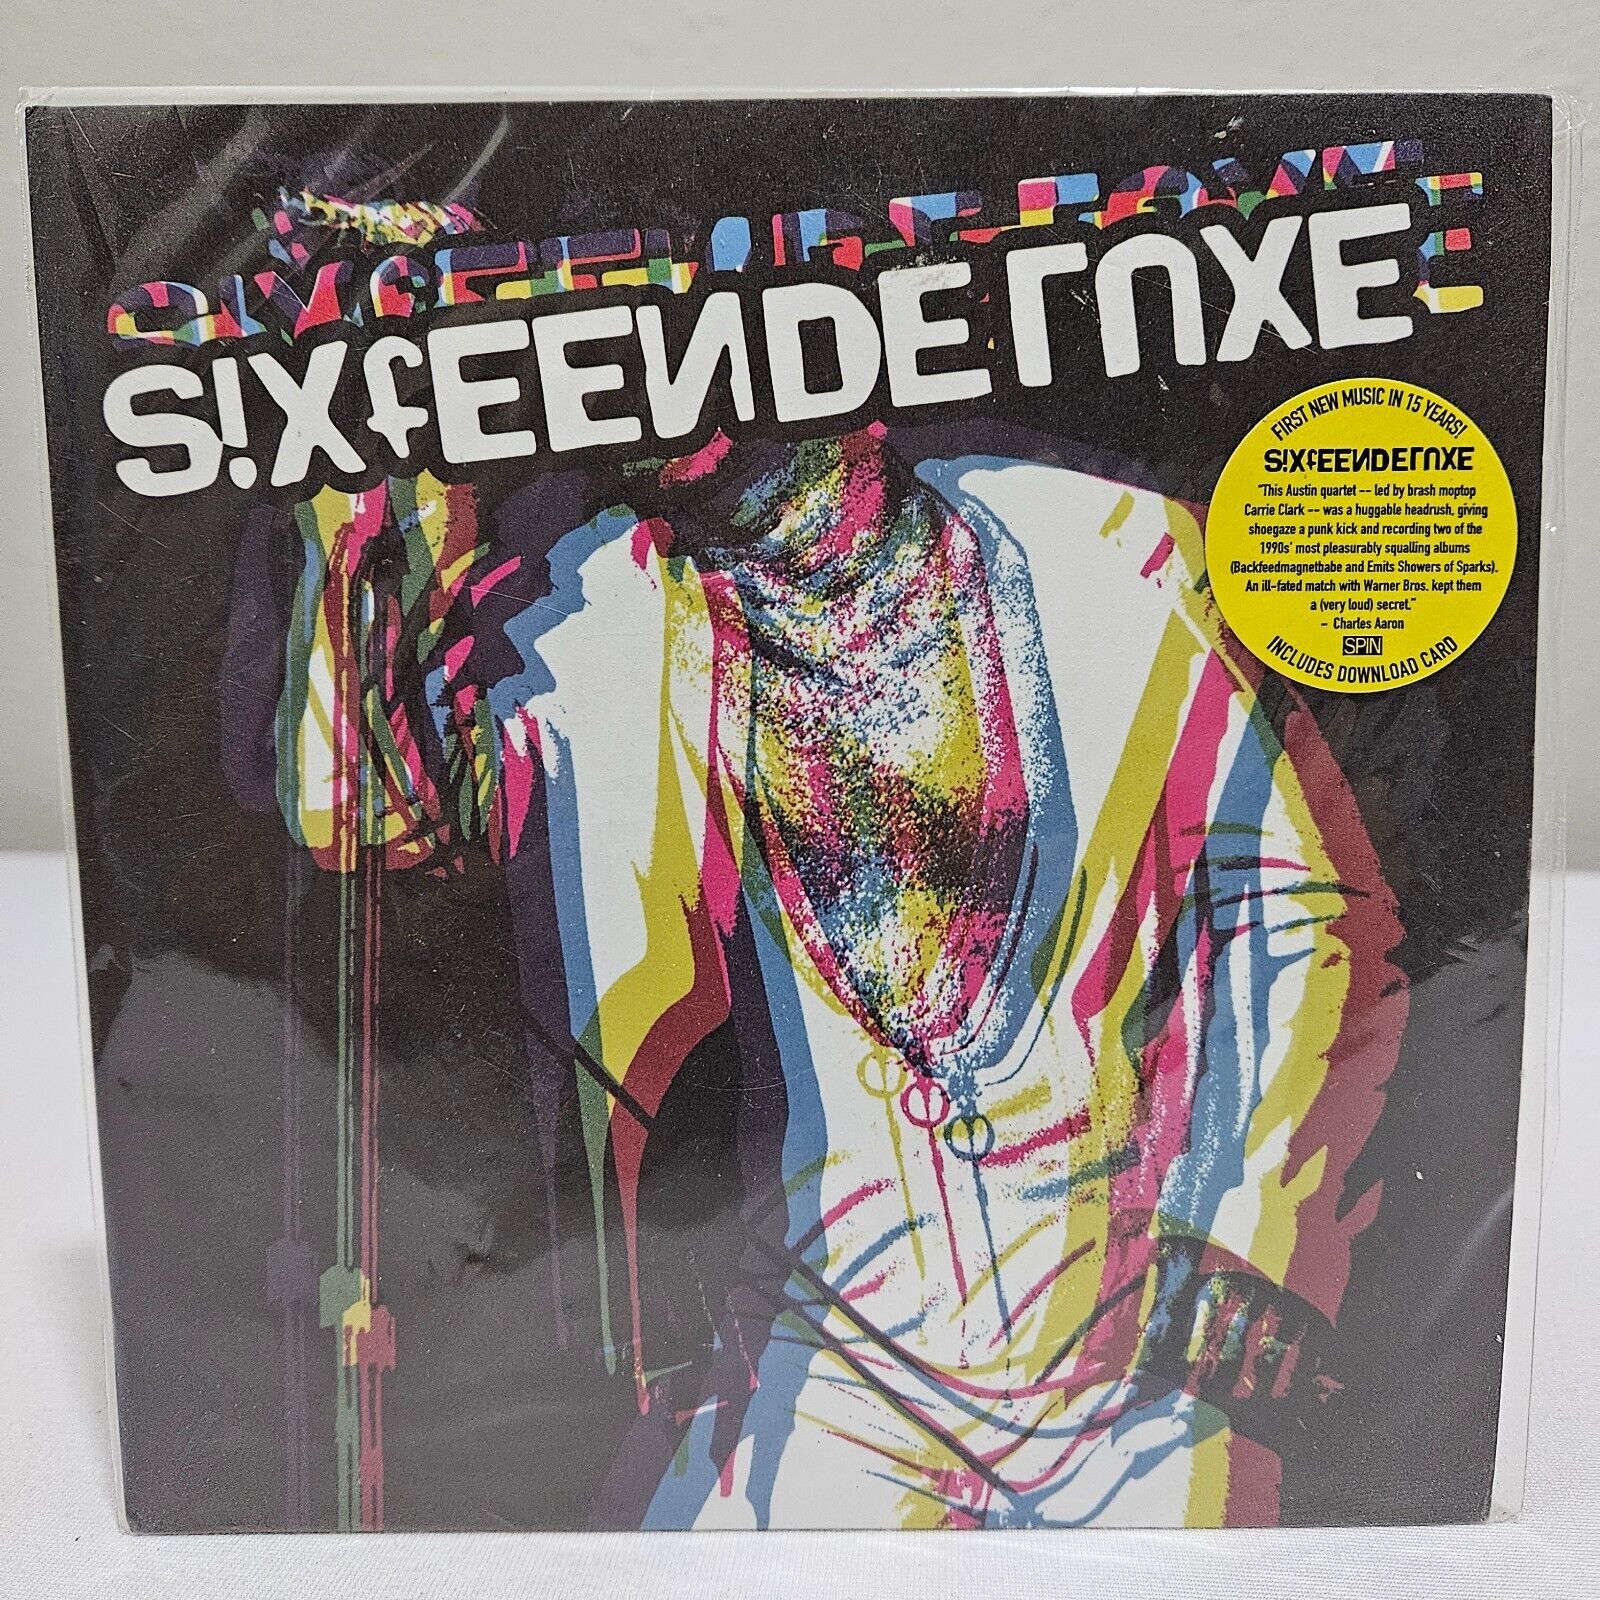 SIXTEEN DELUXE Hit it 2 UNRELEASE 500 MADE SEALED BLUE 7 Inch VINYL 16 DOWNLOAD